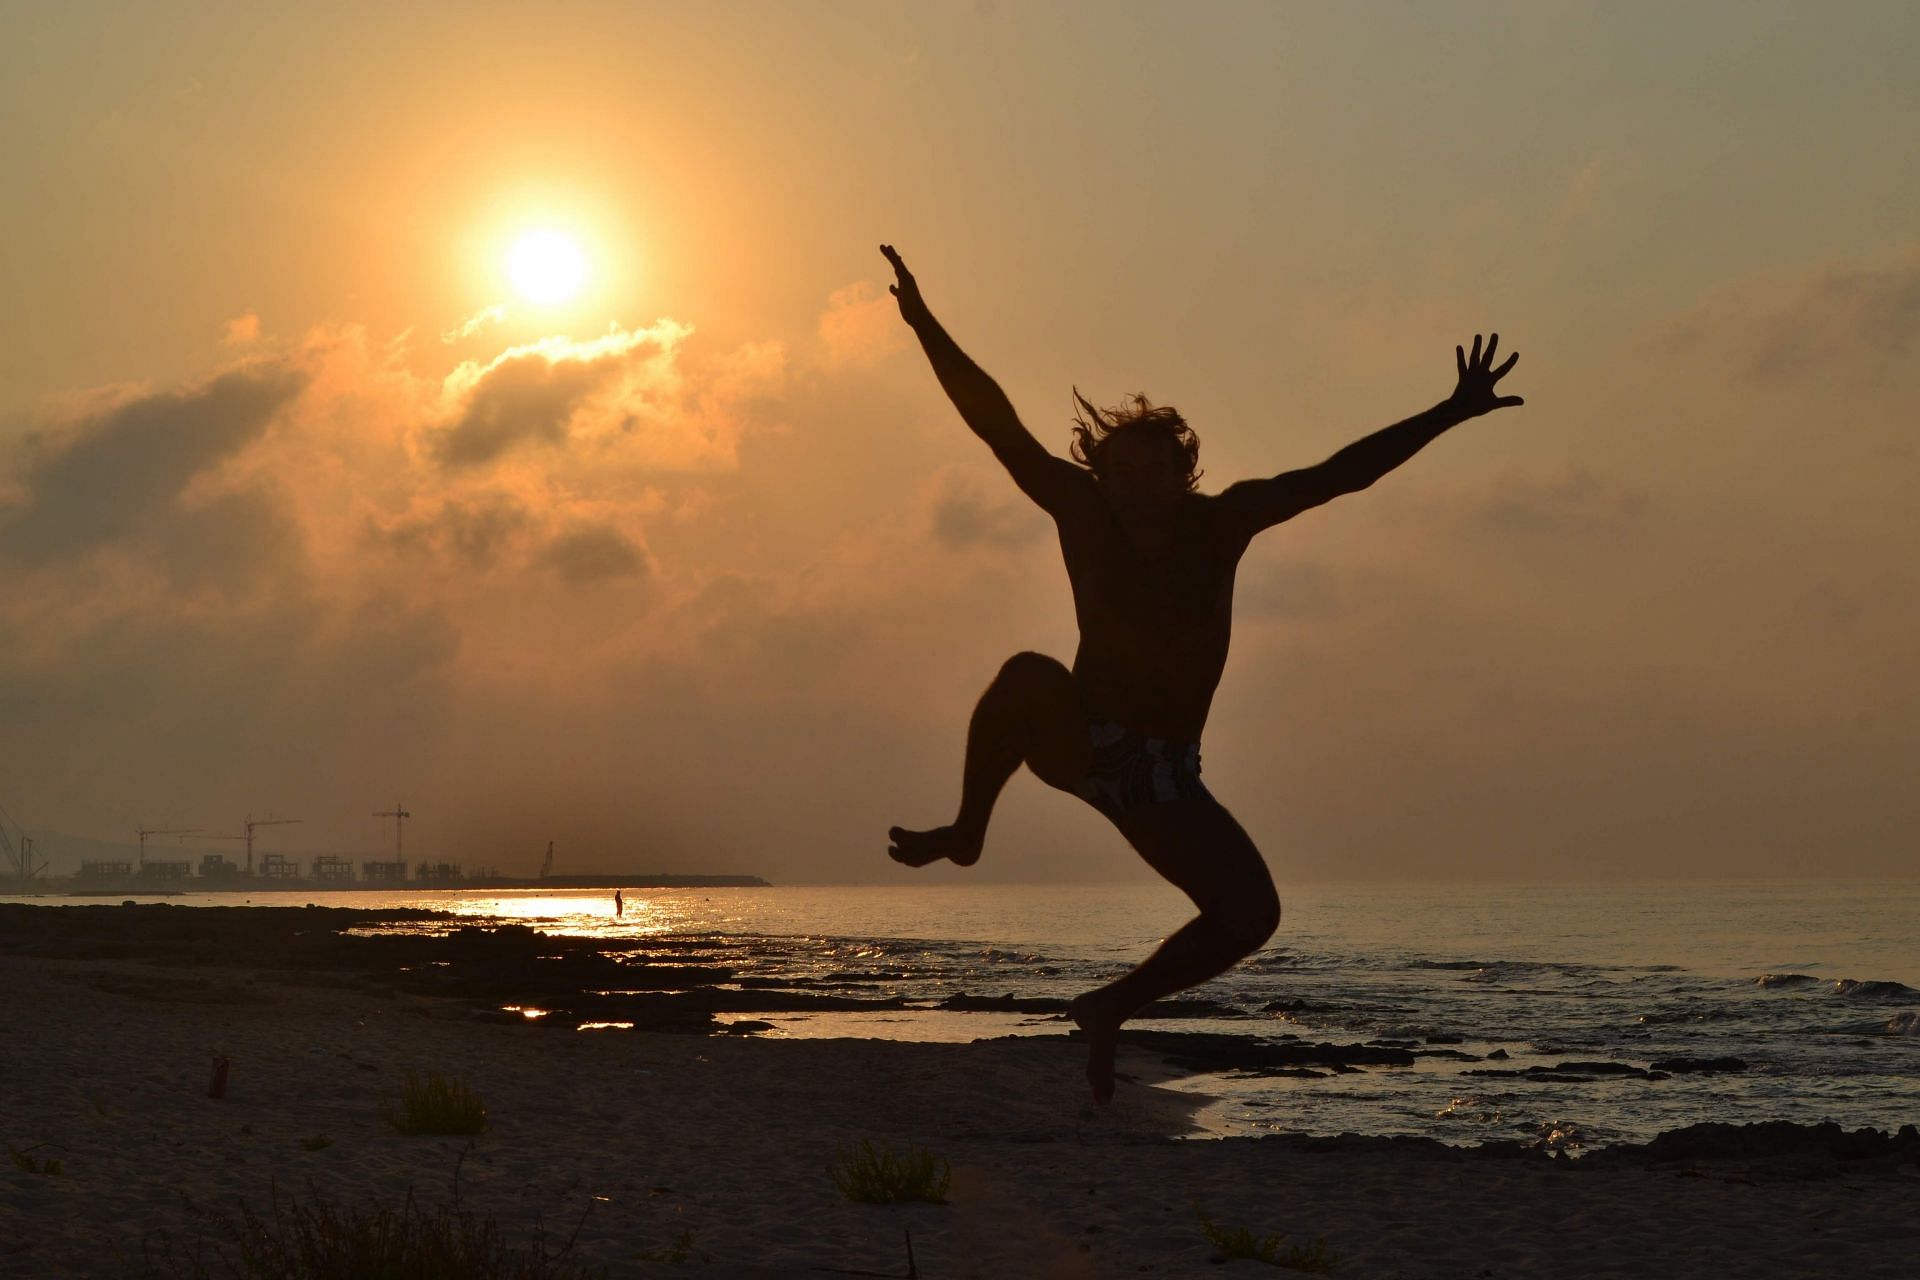 Silhouette of a person jumping in air. (Image via Unsplash/Eugene)